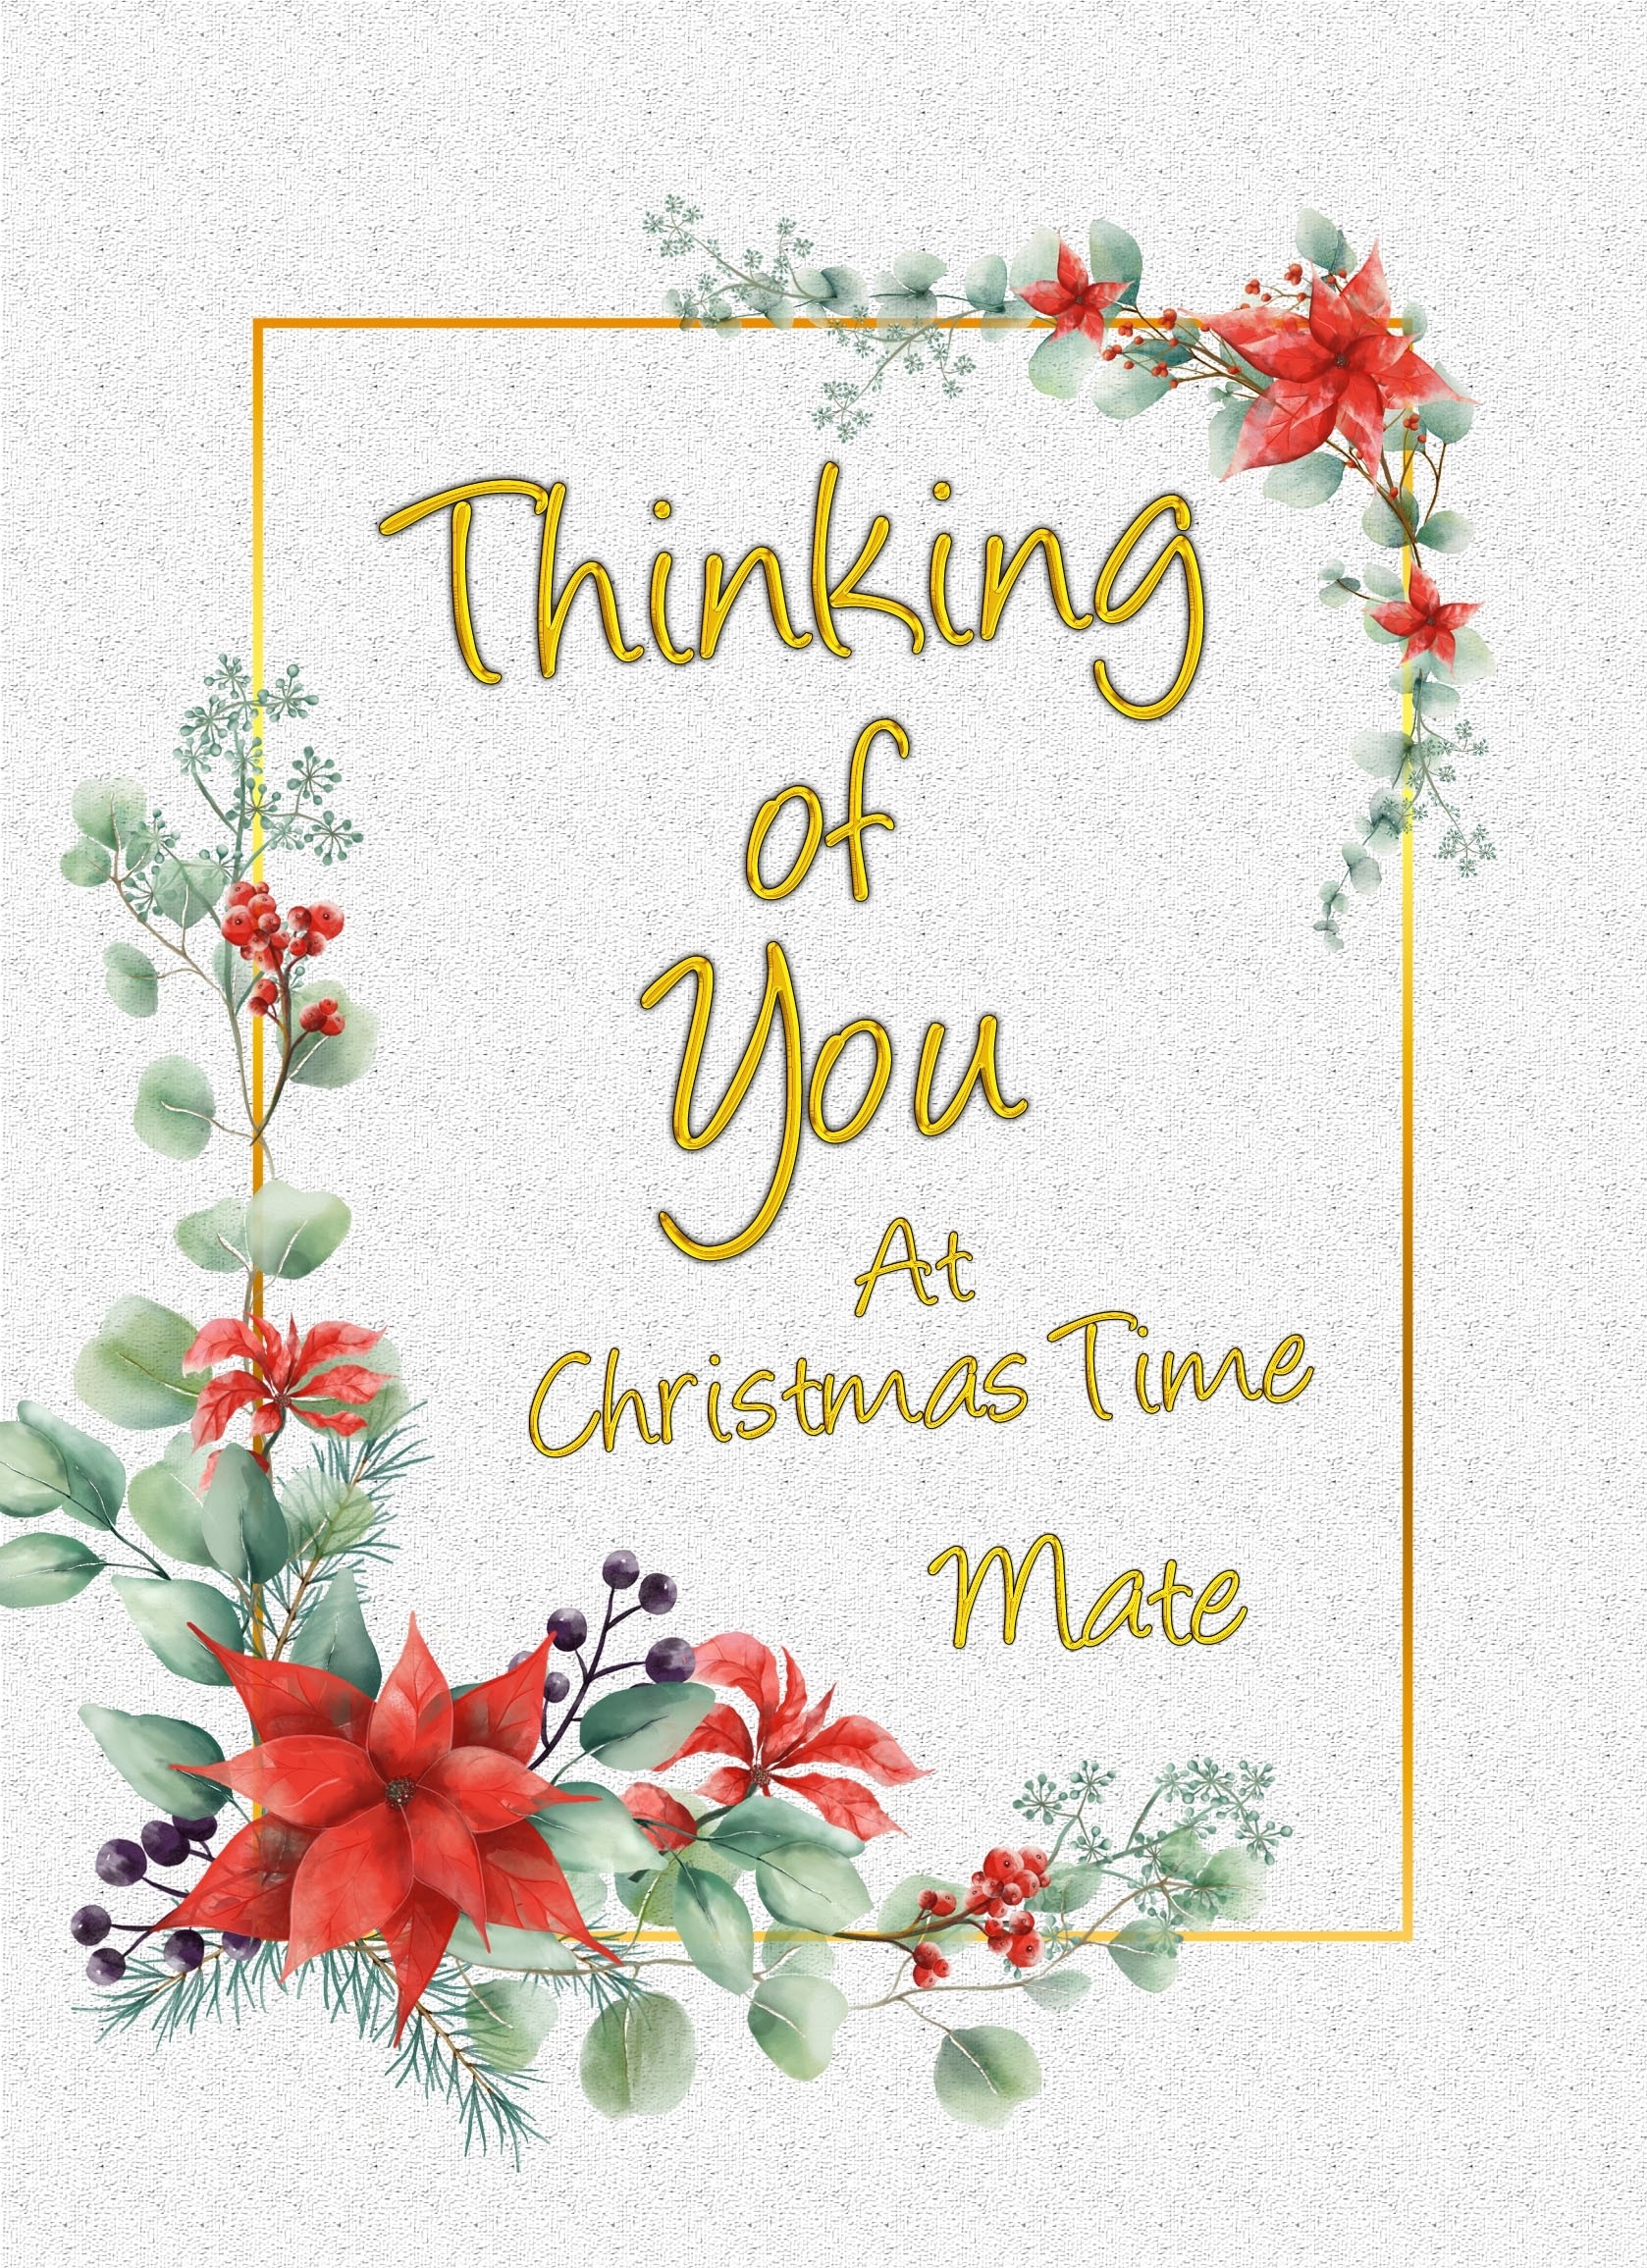 Thinking of You at Christmas Card For Mate